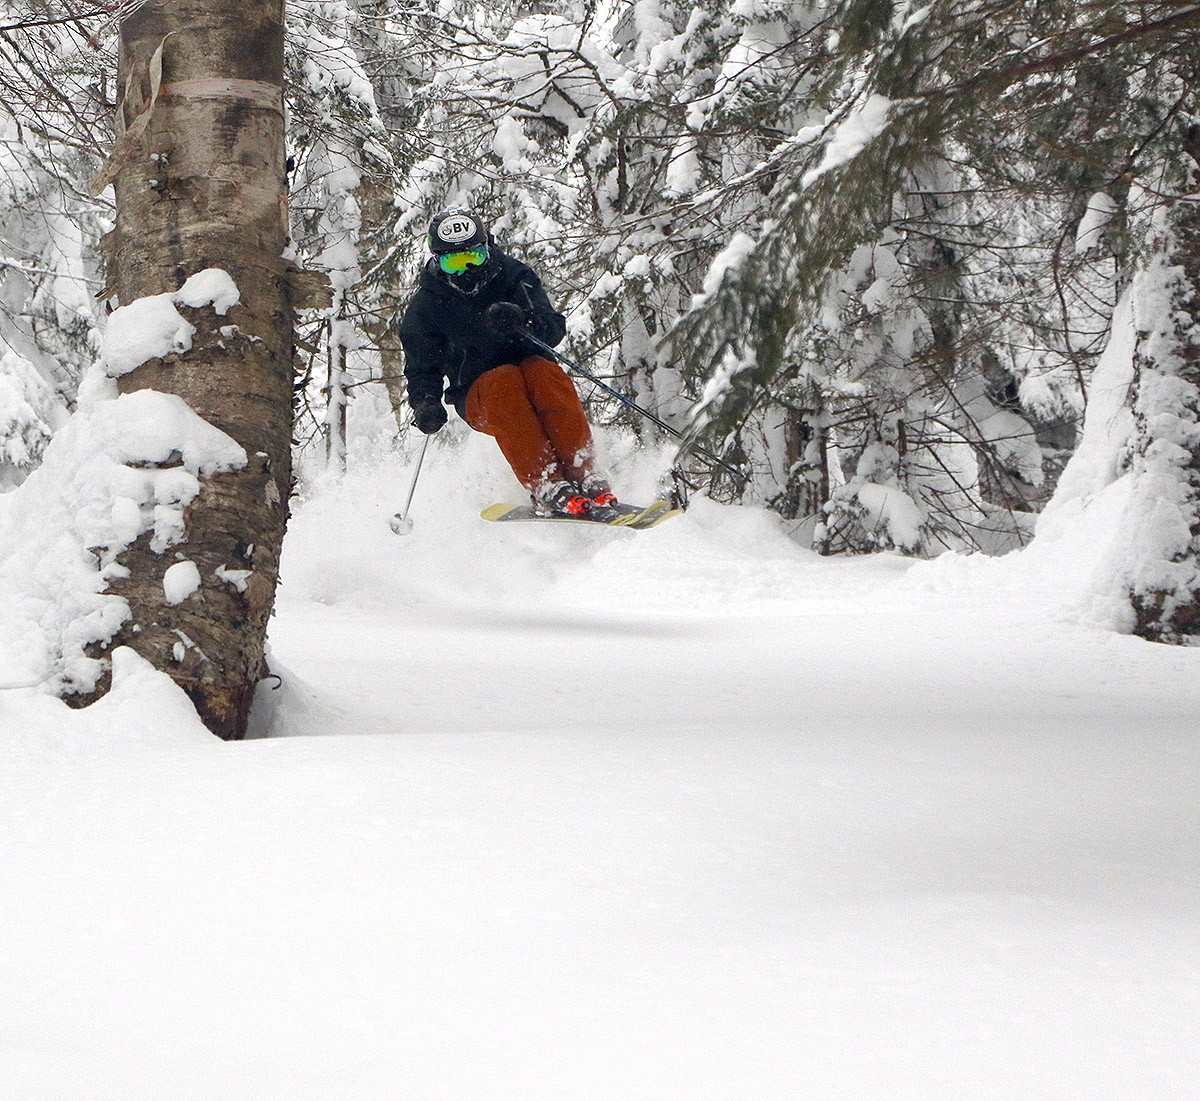 An image of Ty jumping into some untracked powder in a ski line off The Knob at Bolton Valley Ski Resort in Vermont